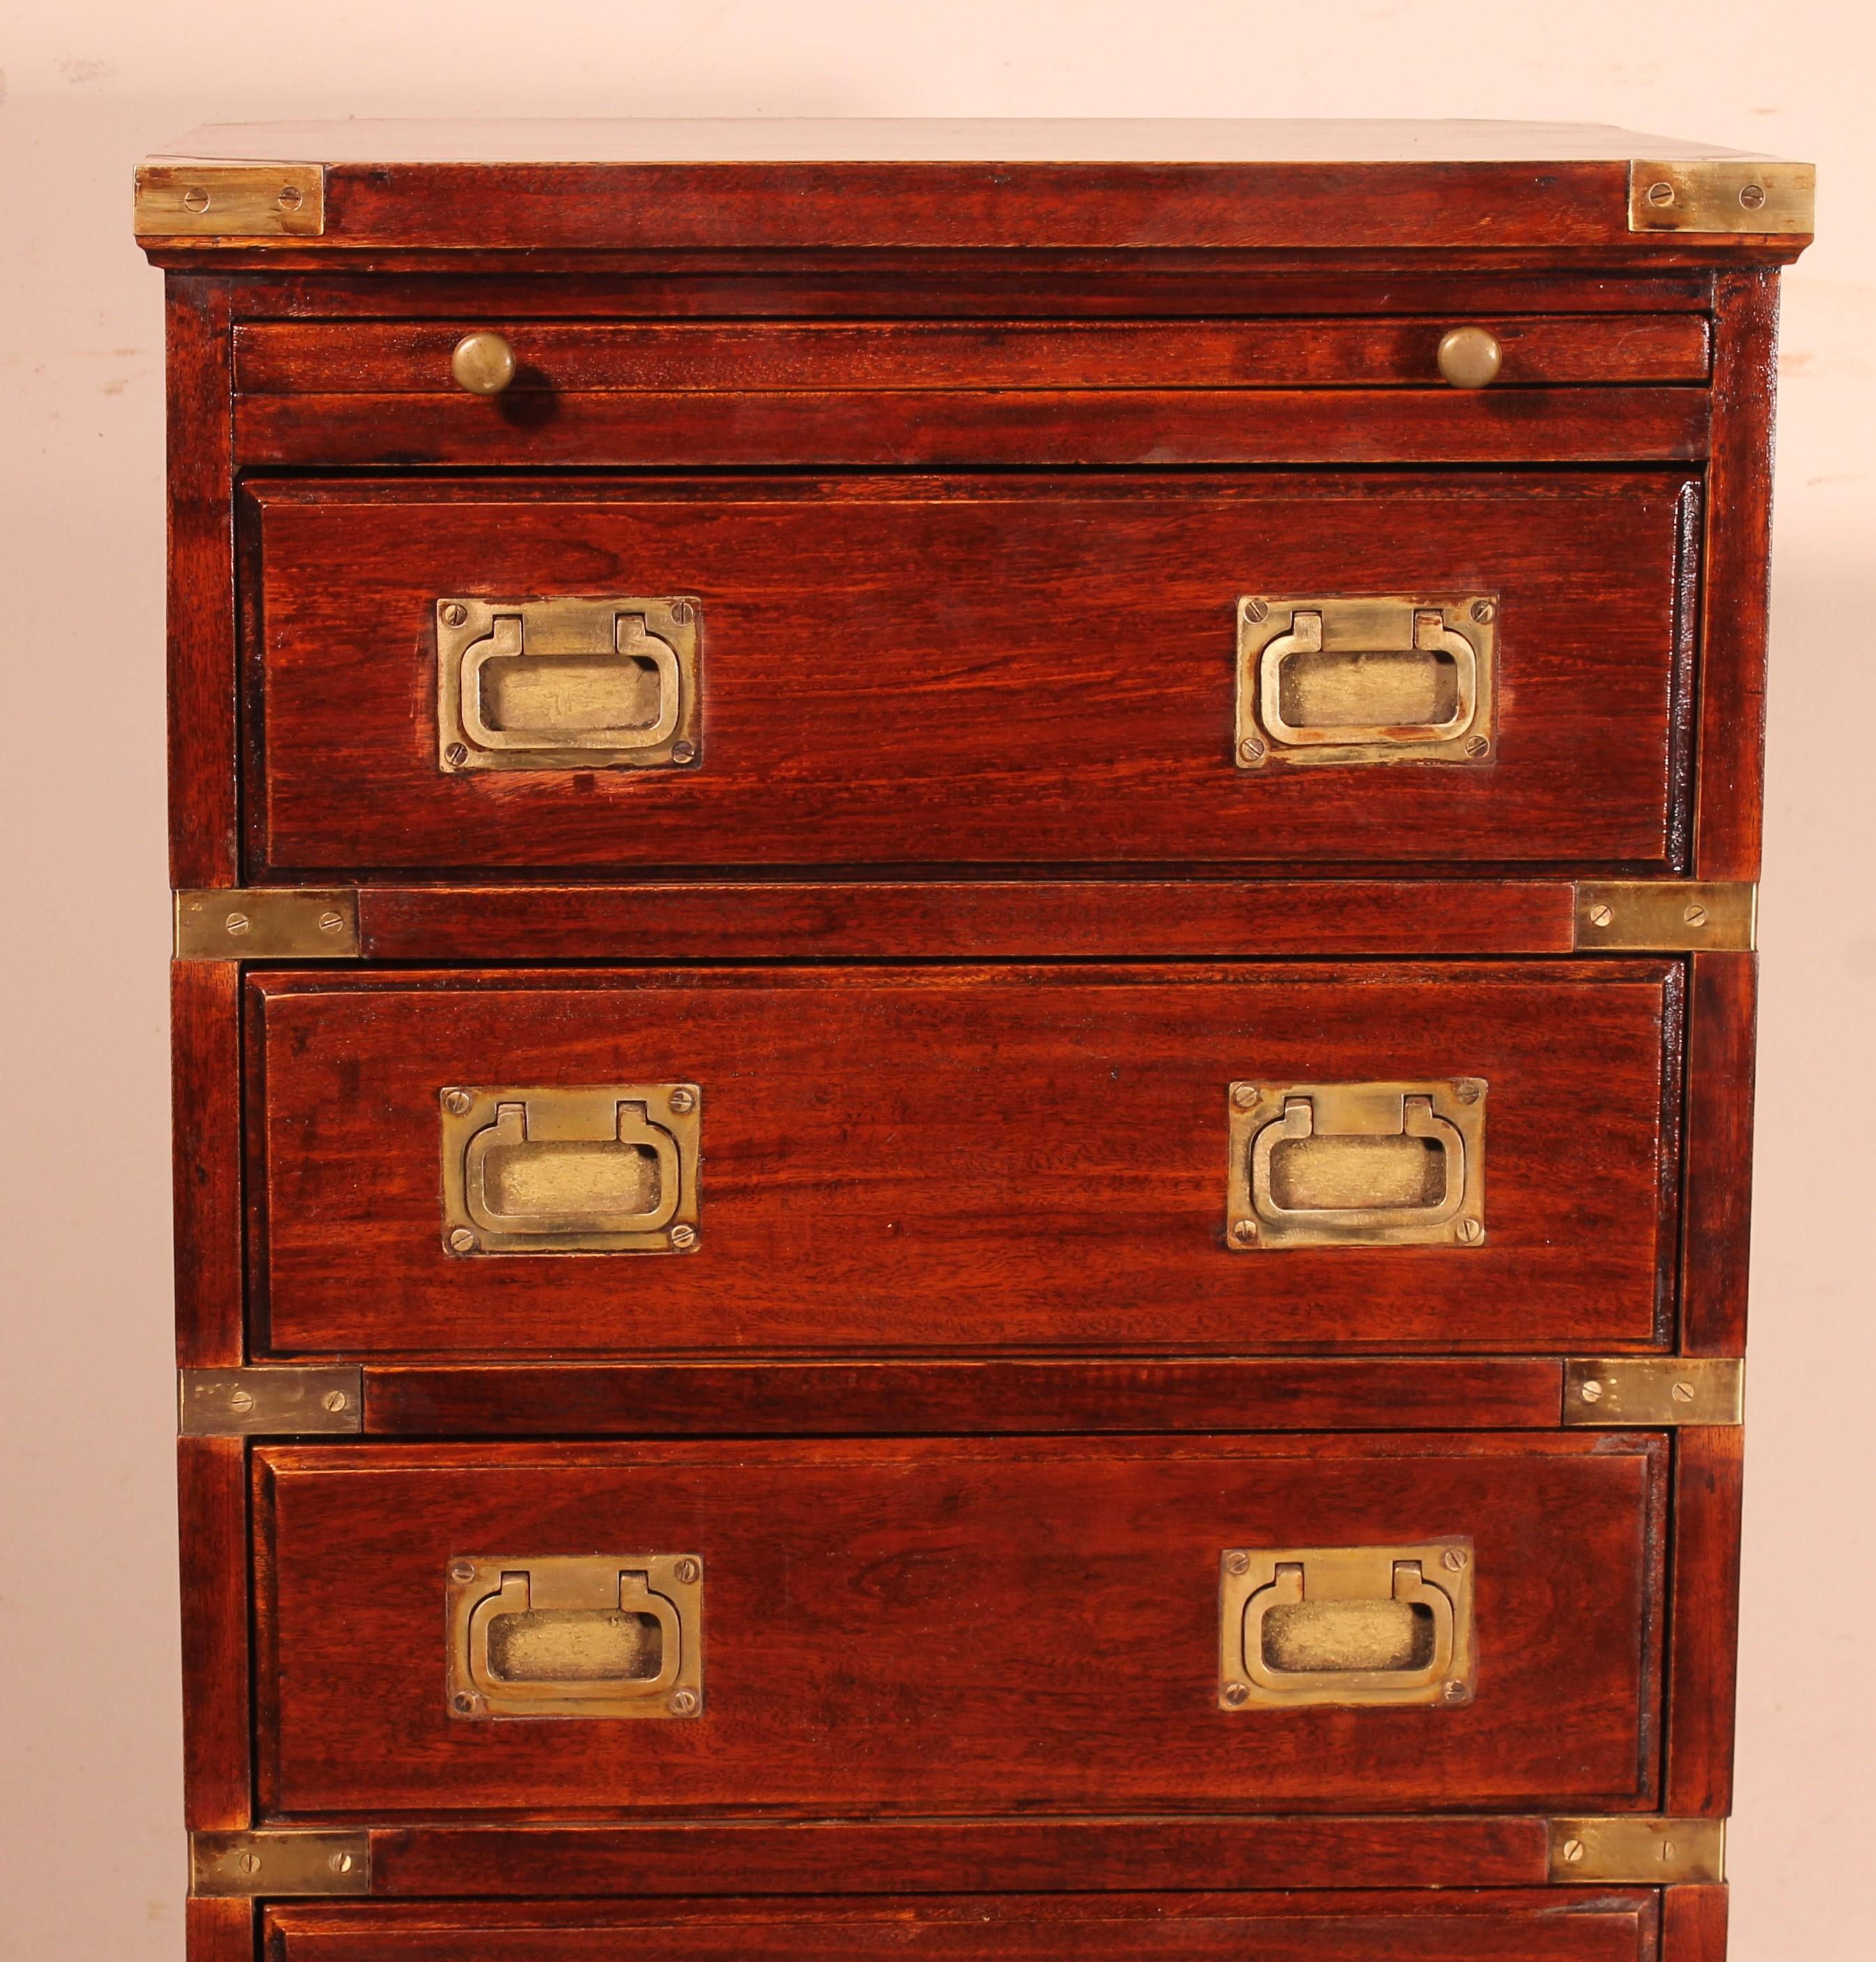 lovely little chest of drawers in marine or campaign style in mahogany
unusual chest made up of 5 drawers
campaign chest of drawers with its typical brass decorations as well as its typical  handles 
Small writing table under the top
In superb